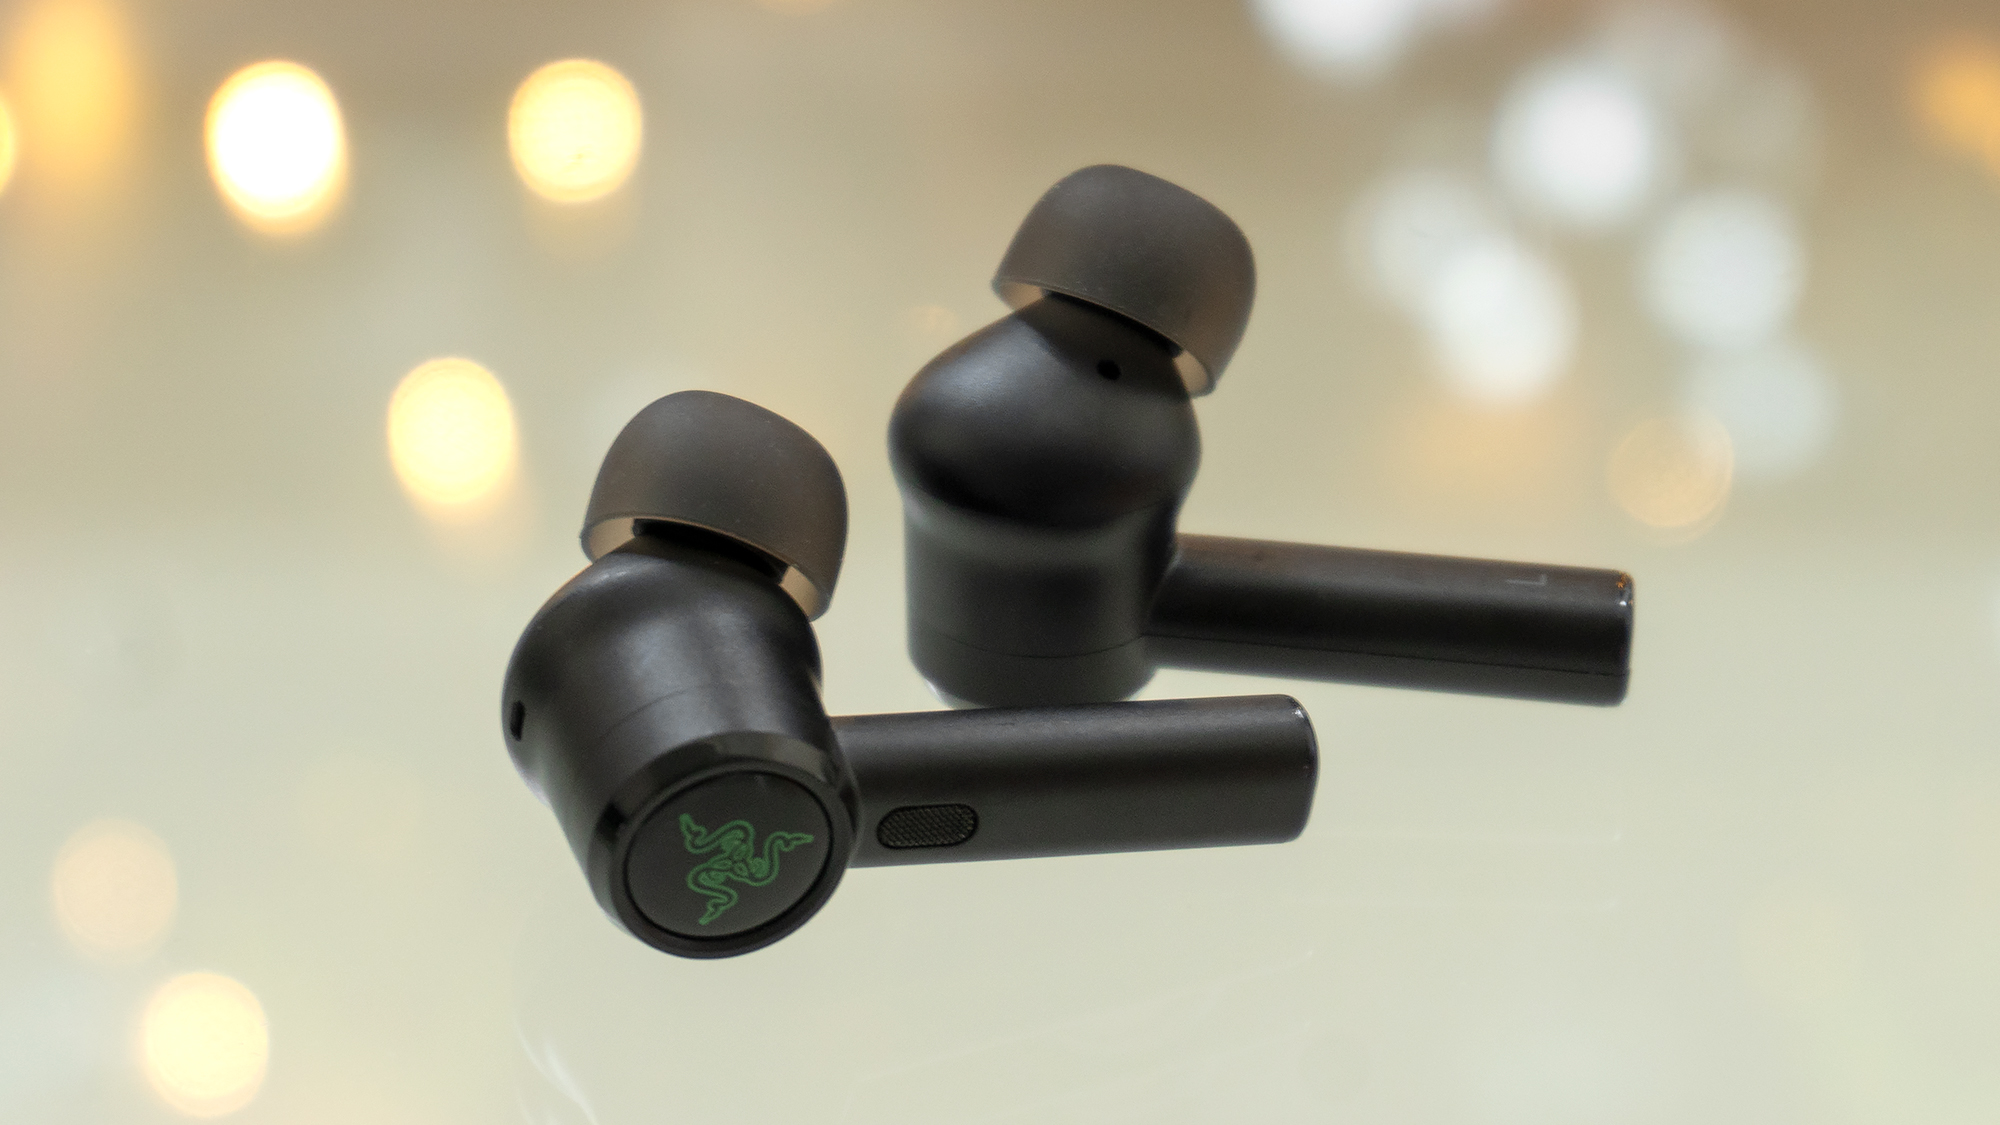 The Hammerhead True Wireless Pros are larger than Apple's AirPod Pros, but feature generous 10-millimetre drivers producing much better sound. (Photo: Andrew Liszewski / Gizmodo)